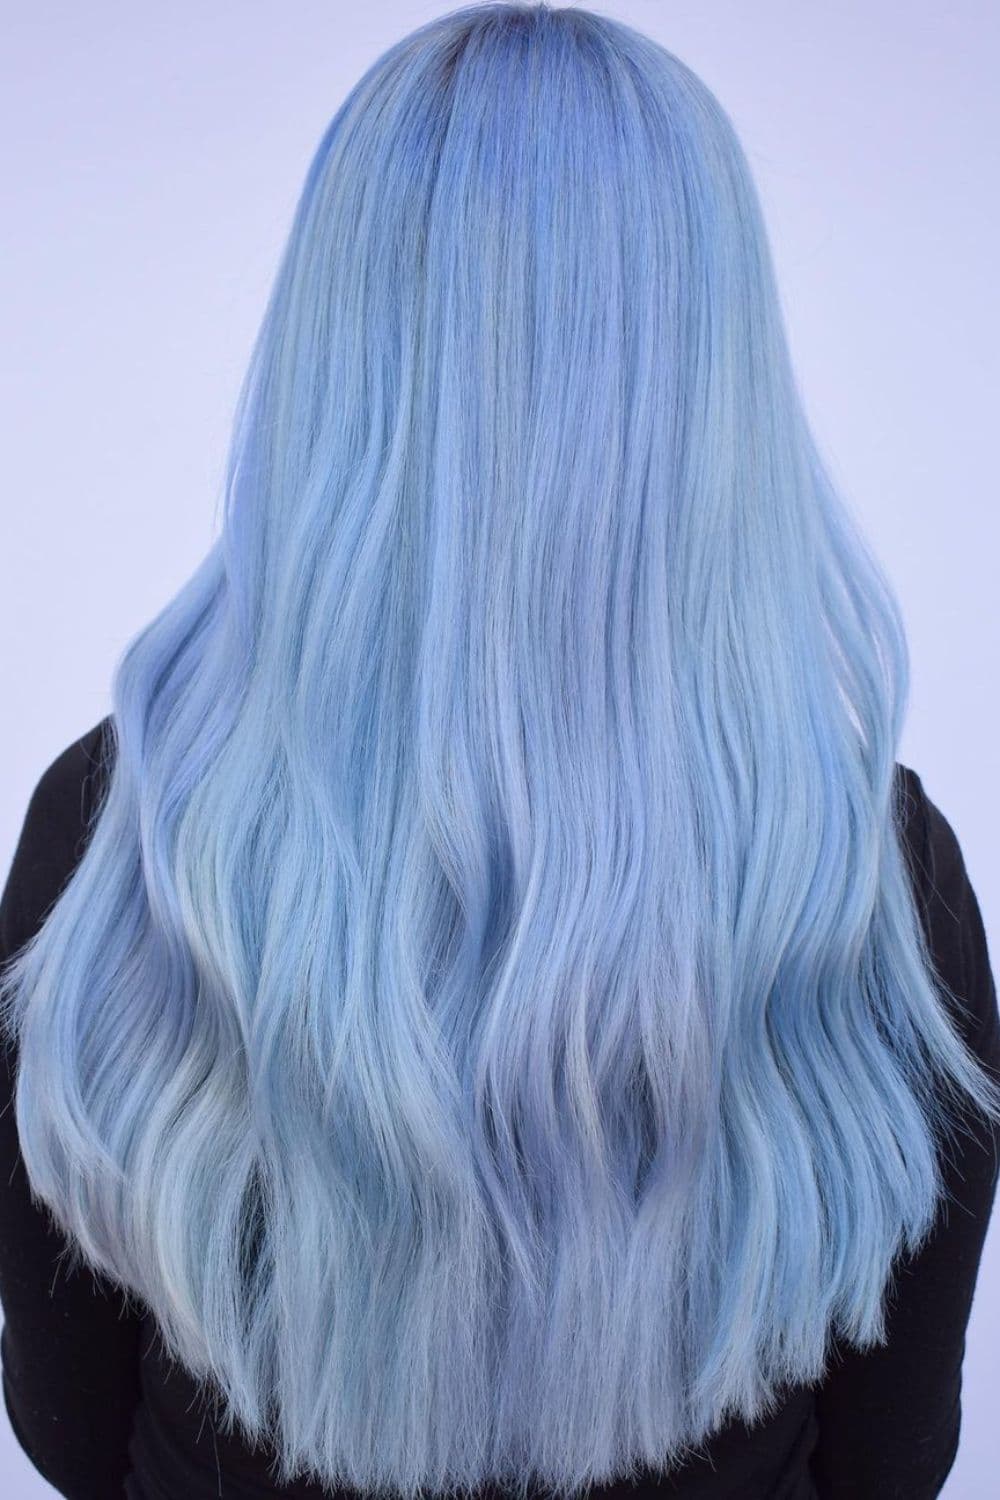 A woman with long pastel blue hair.